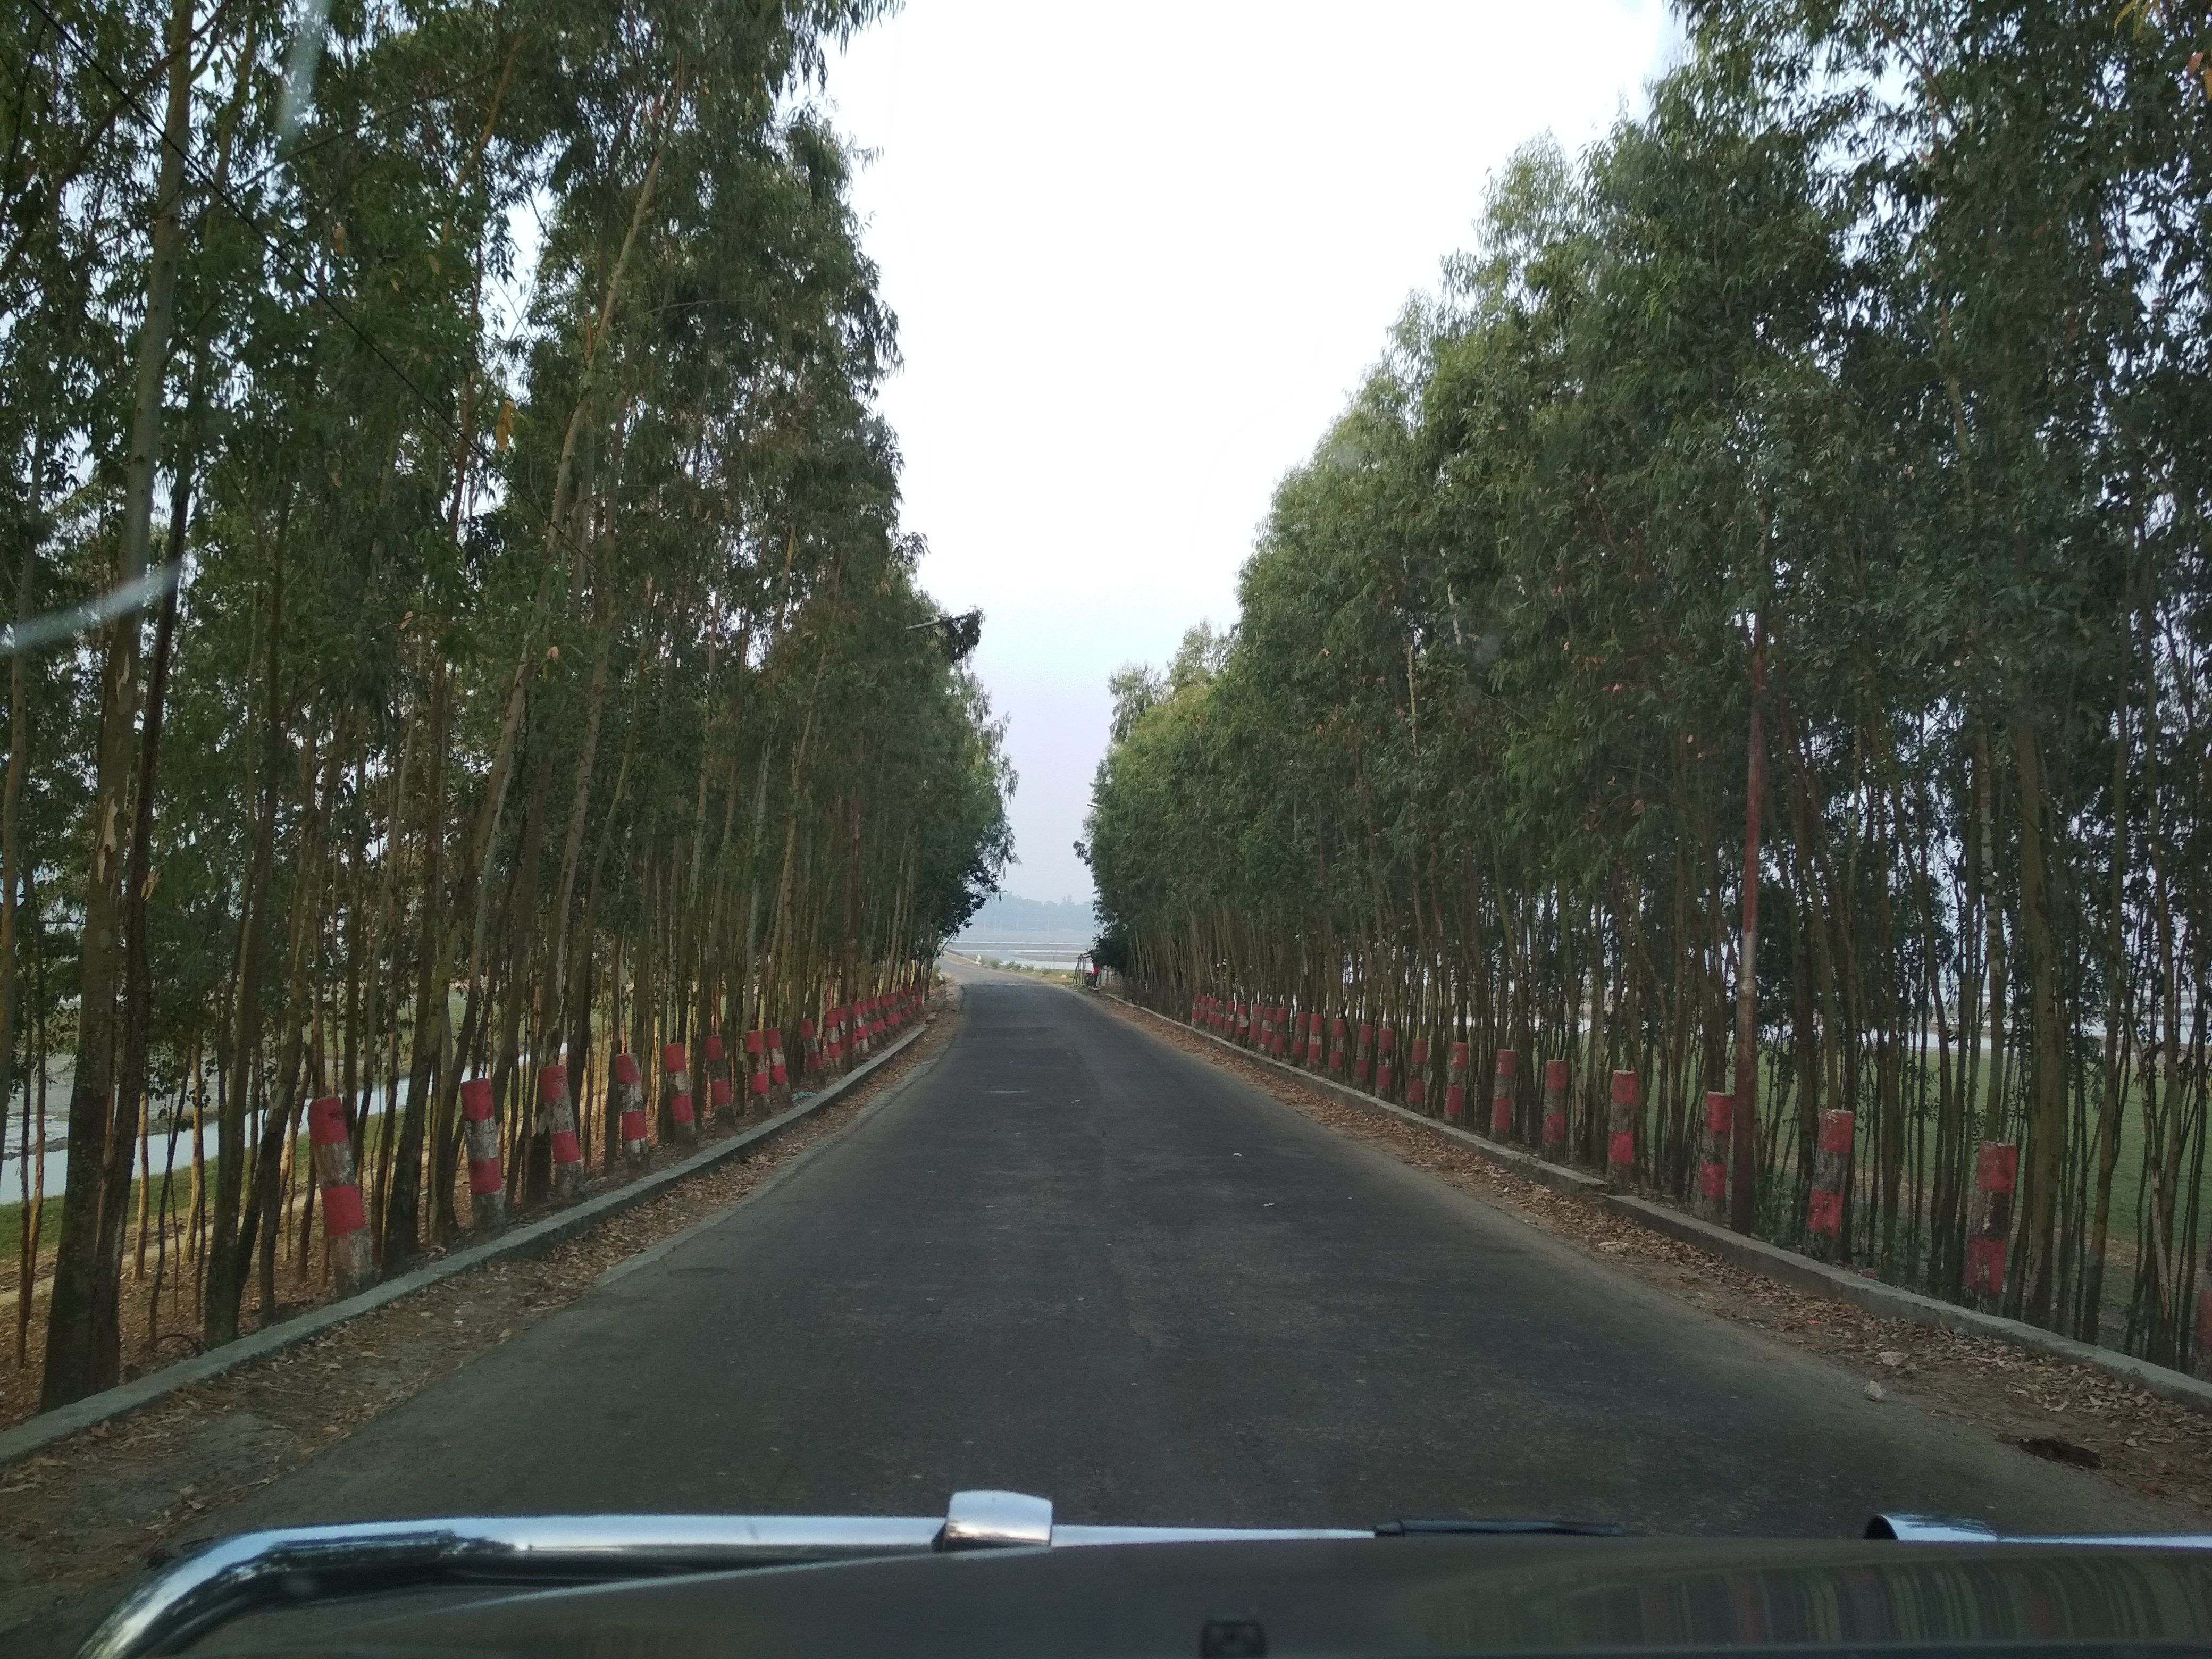 Road toMatarbari island just after crossing Maheshkhali bridge. This road is beautified by planting trees in strait line on the both side of the road. It will looks like a tunnel when you drive through.